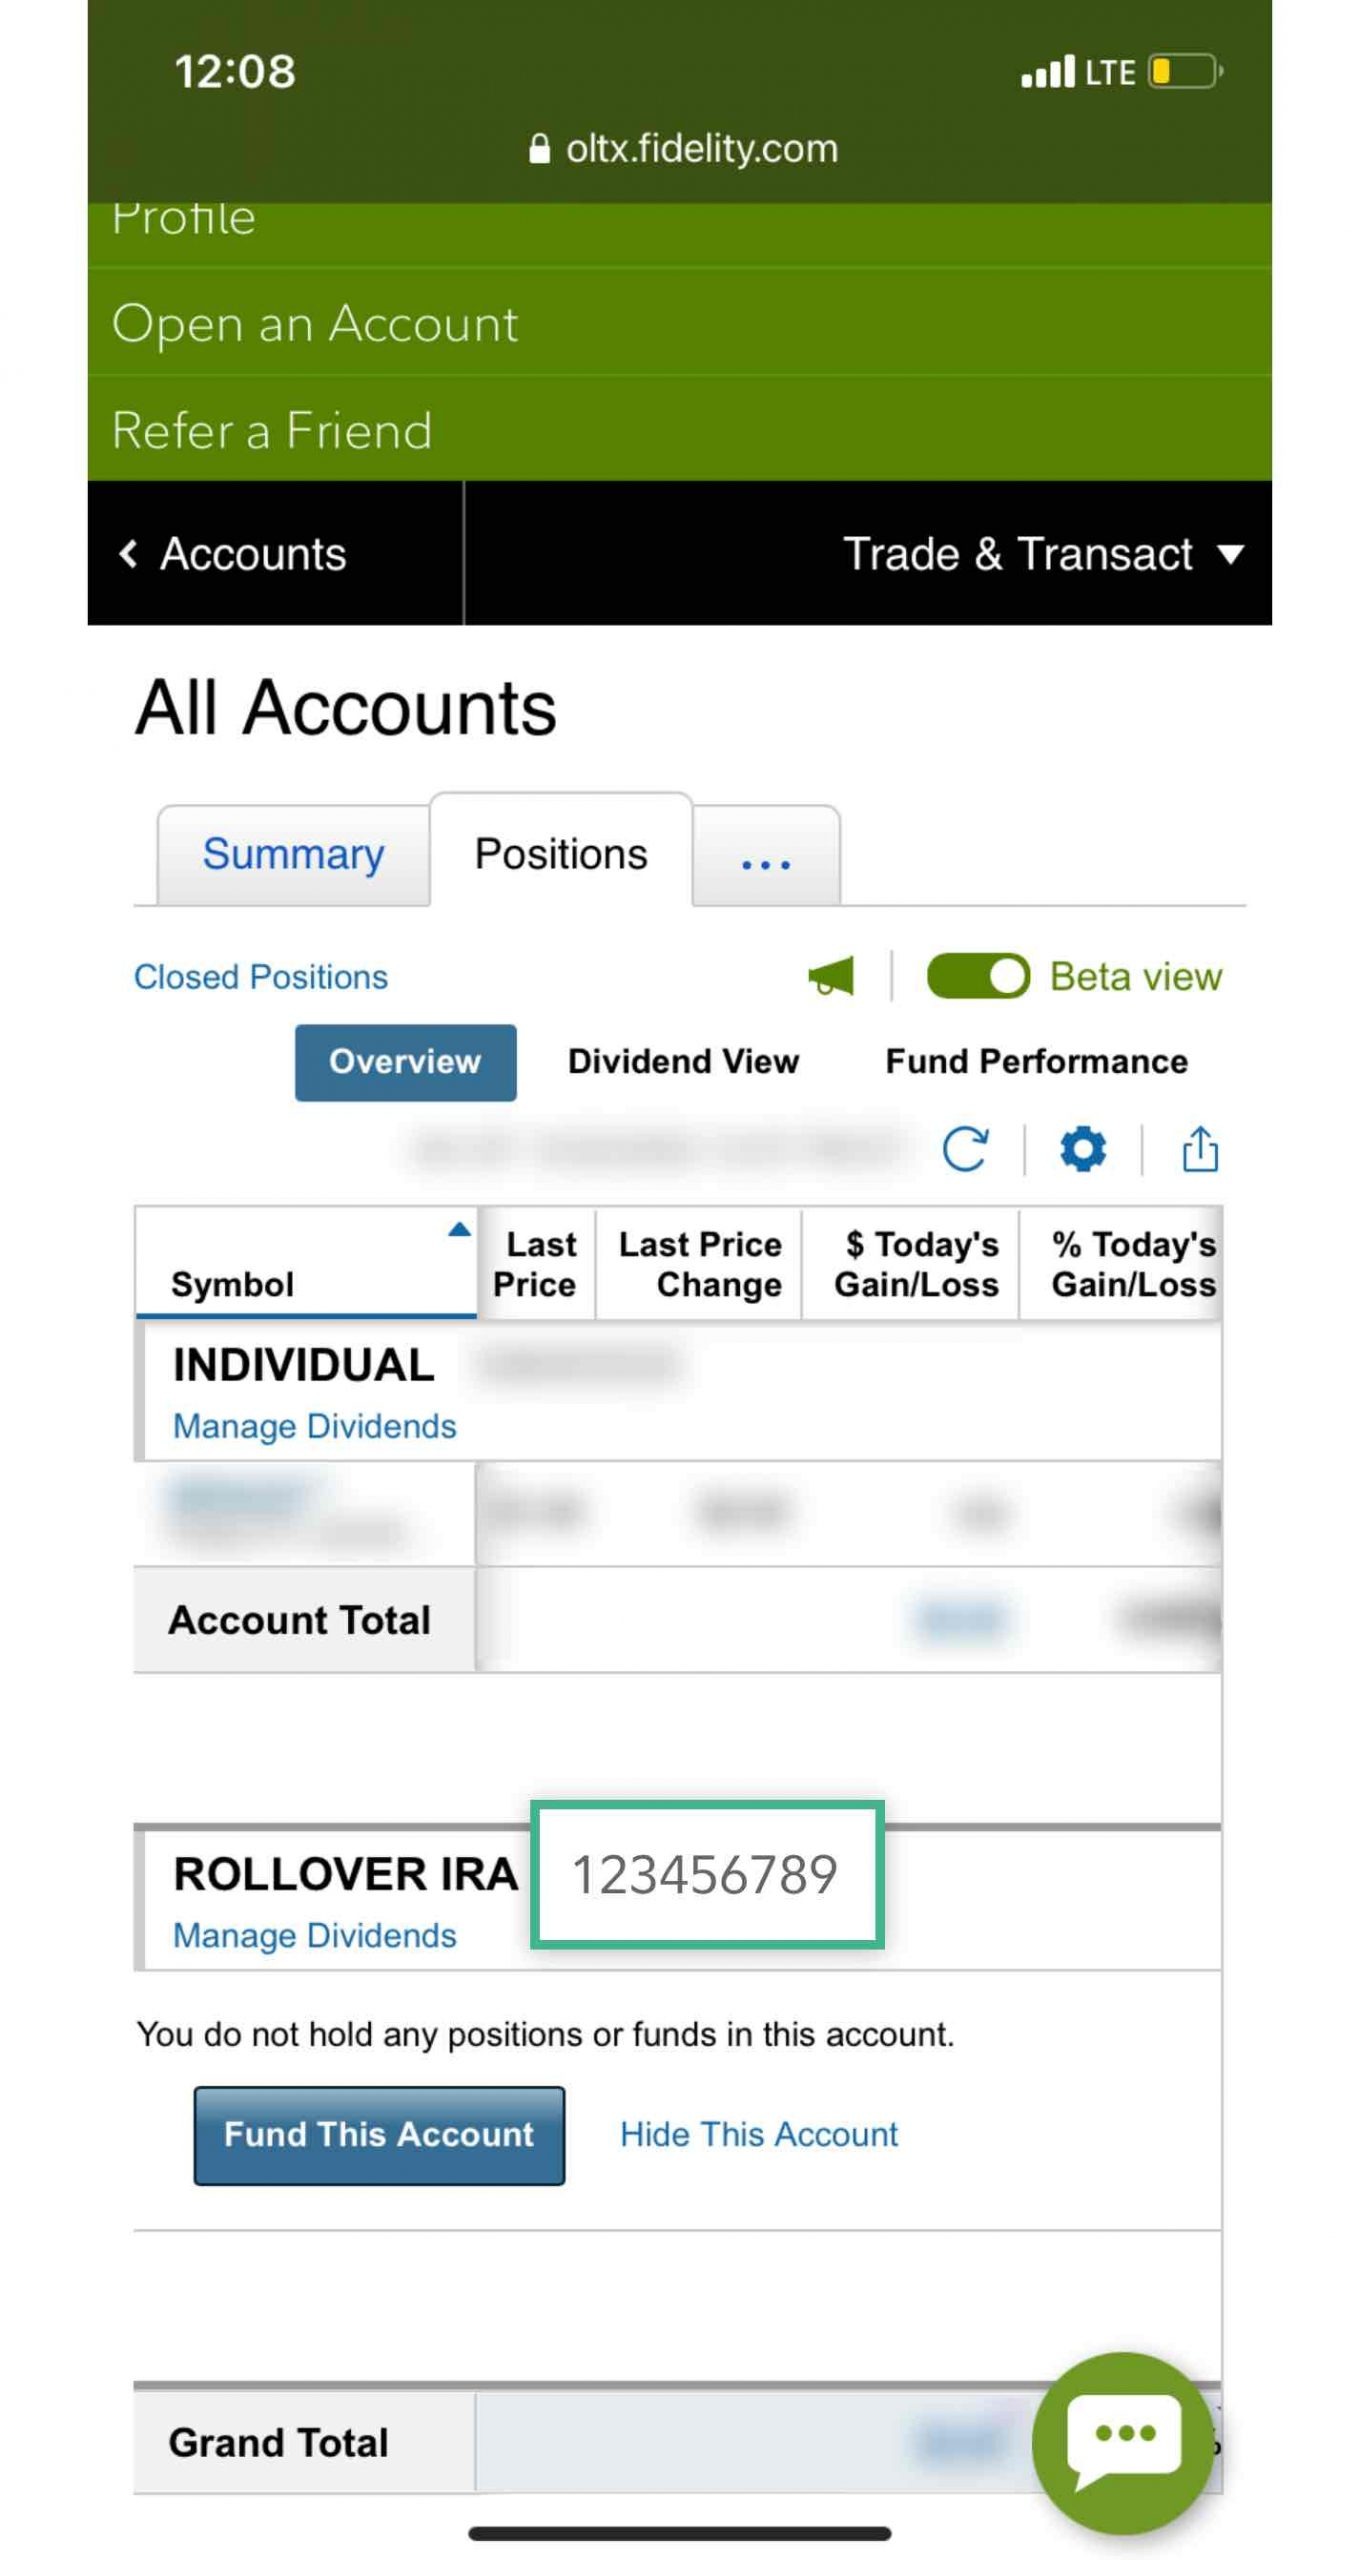 Fidelity Routing Number - Locate Your Number